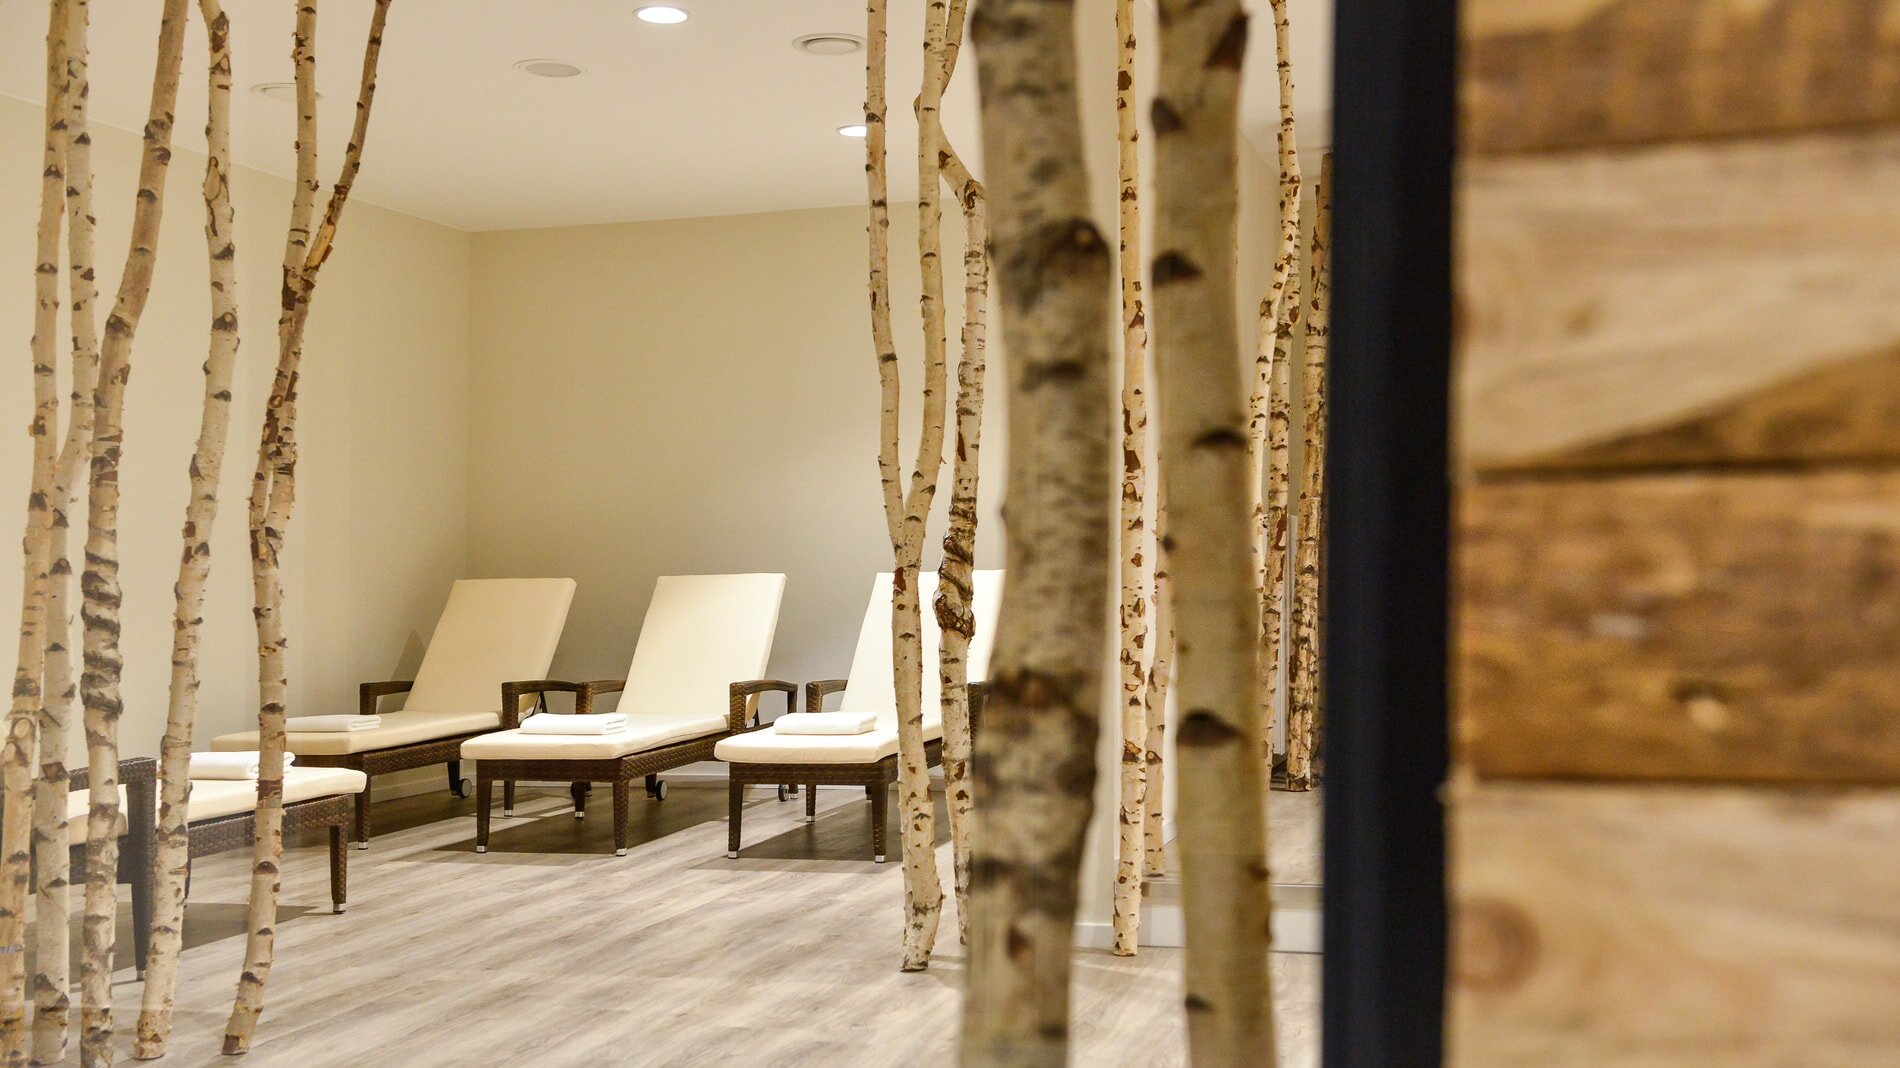 Steam bath &amp; relaxation room